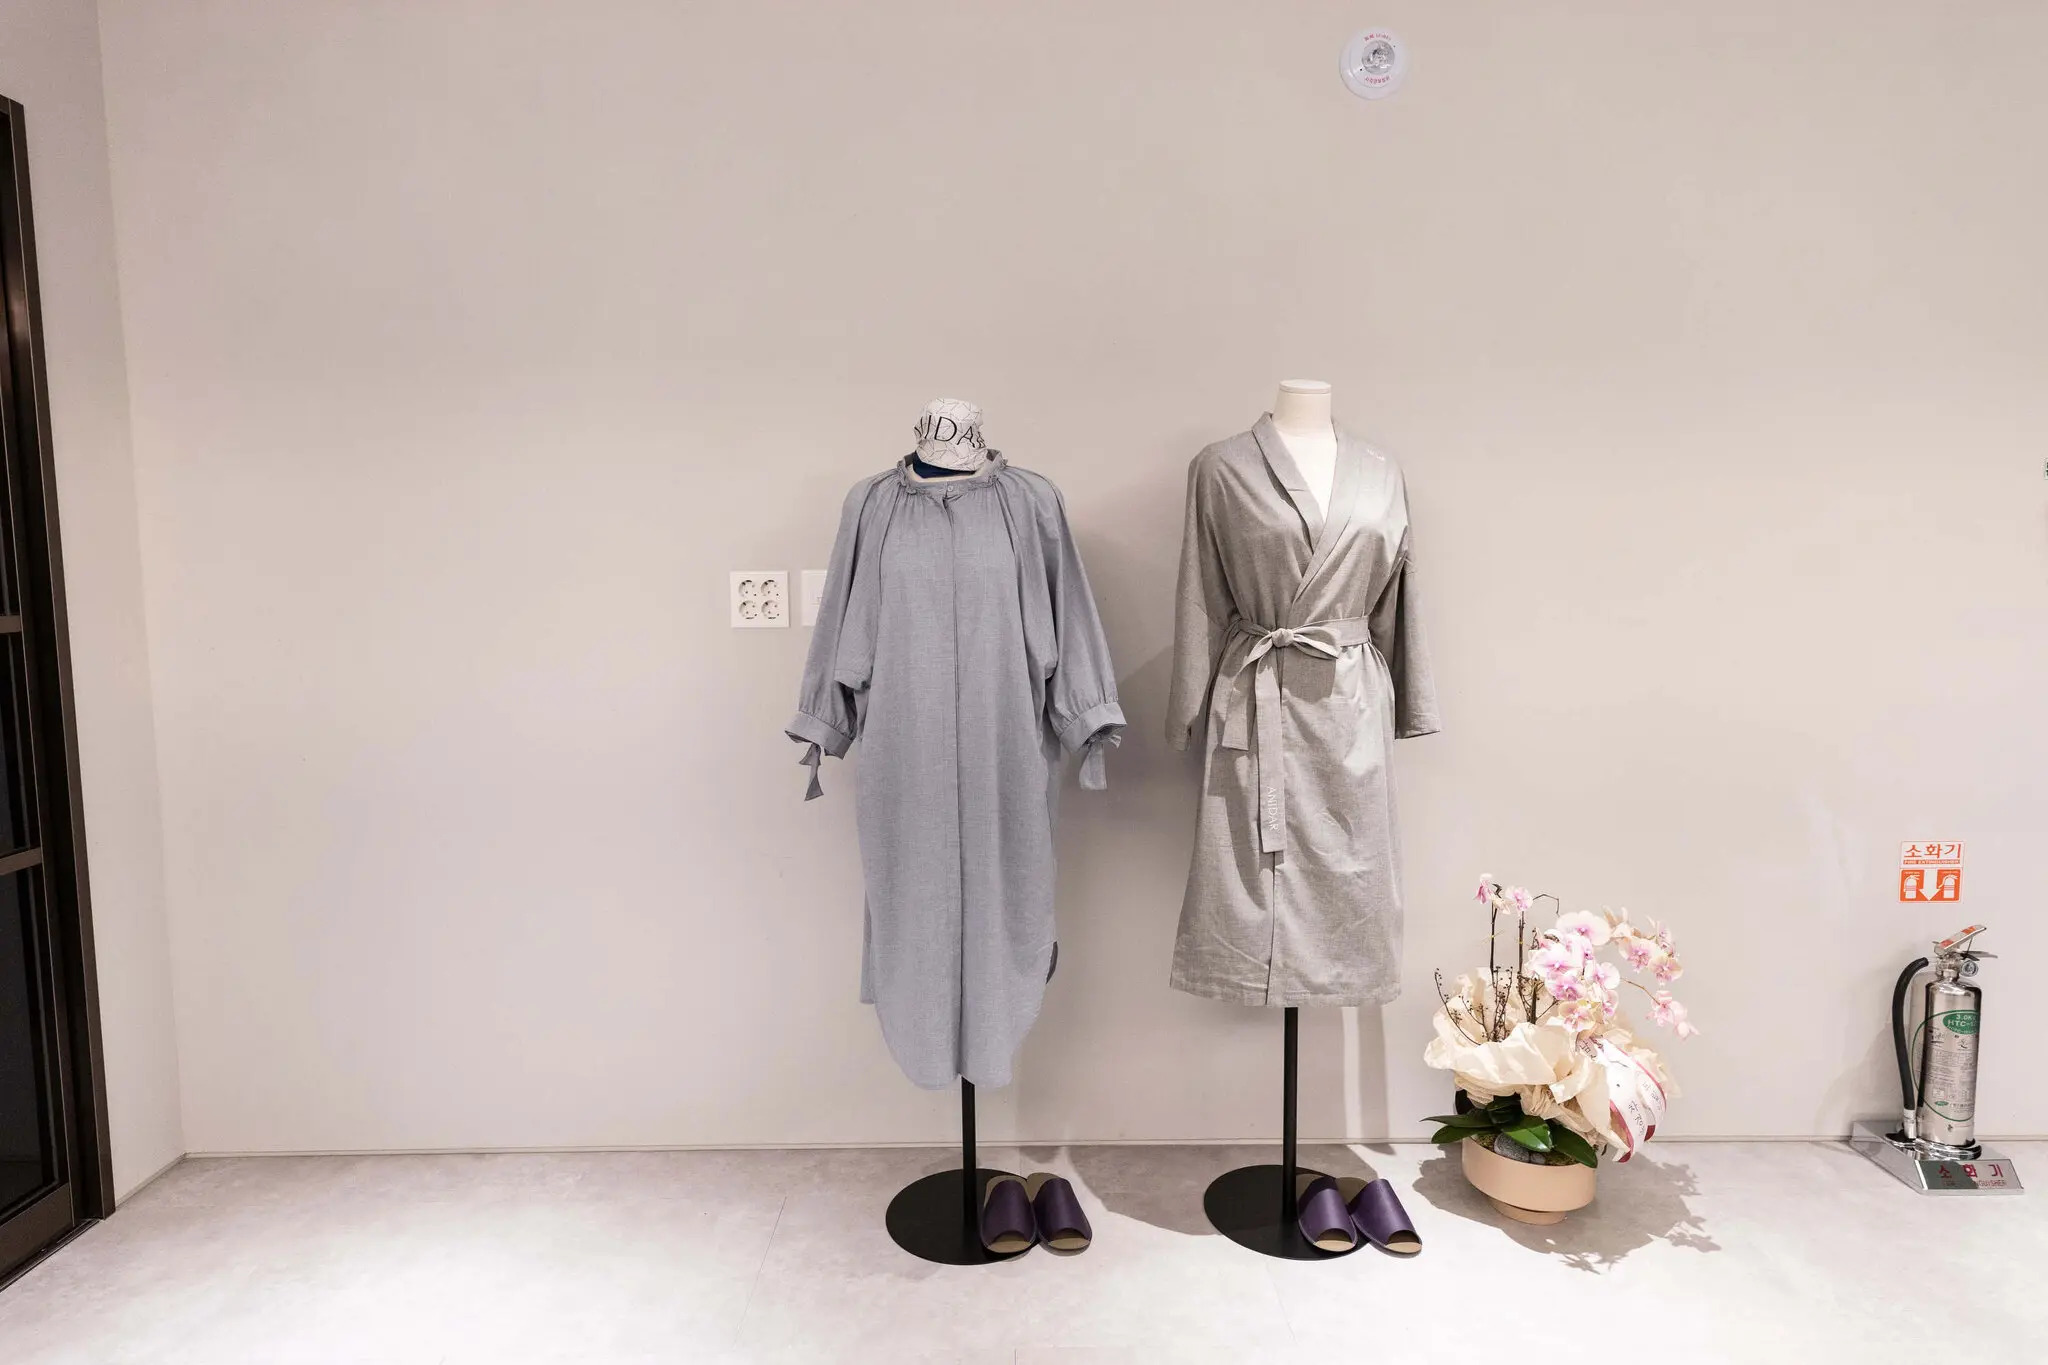 Robes for mothers on display at Anidar.